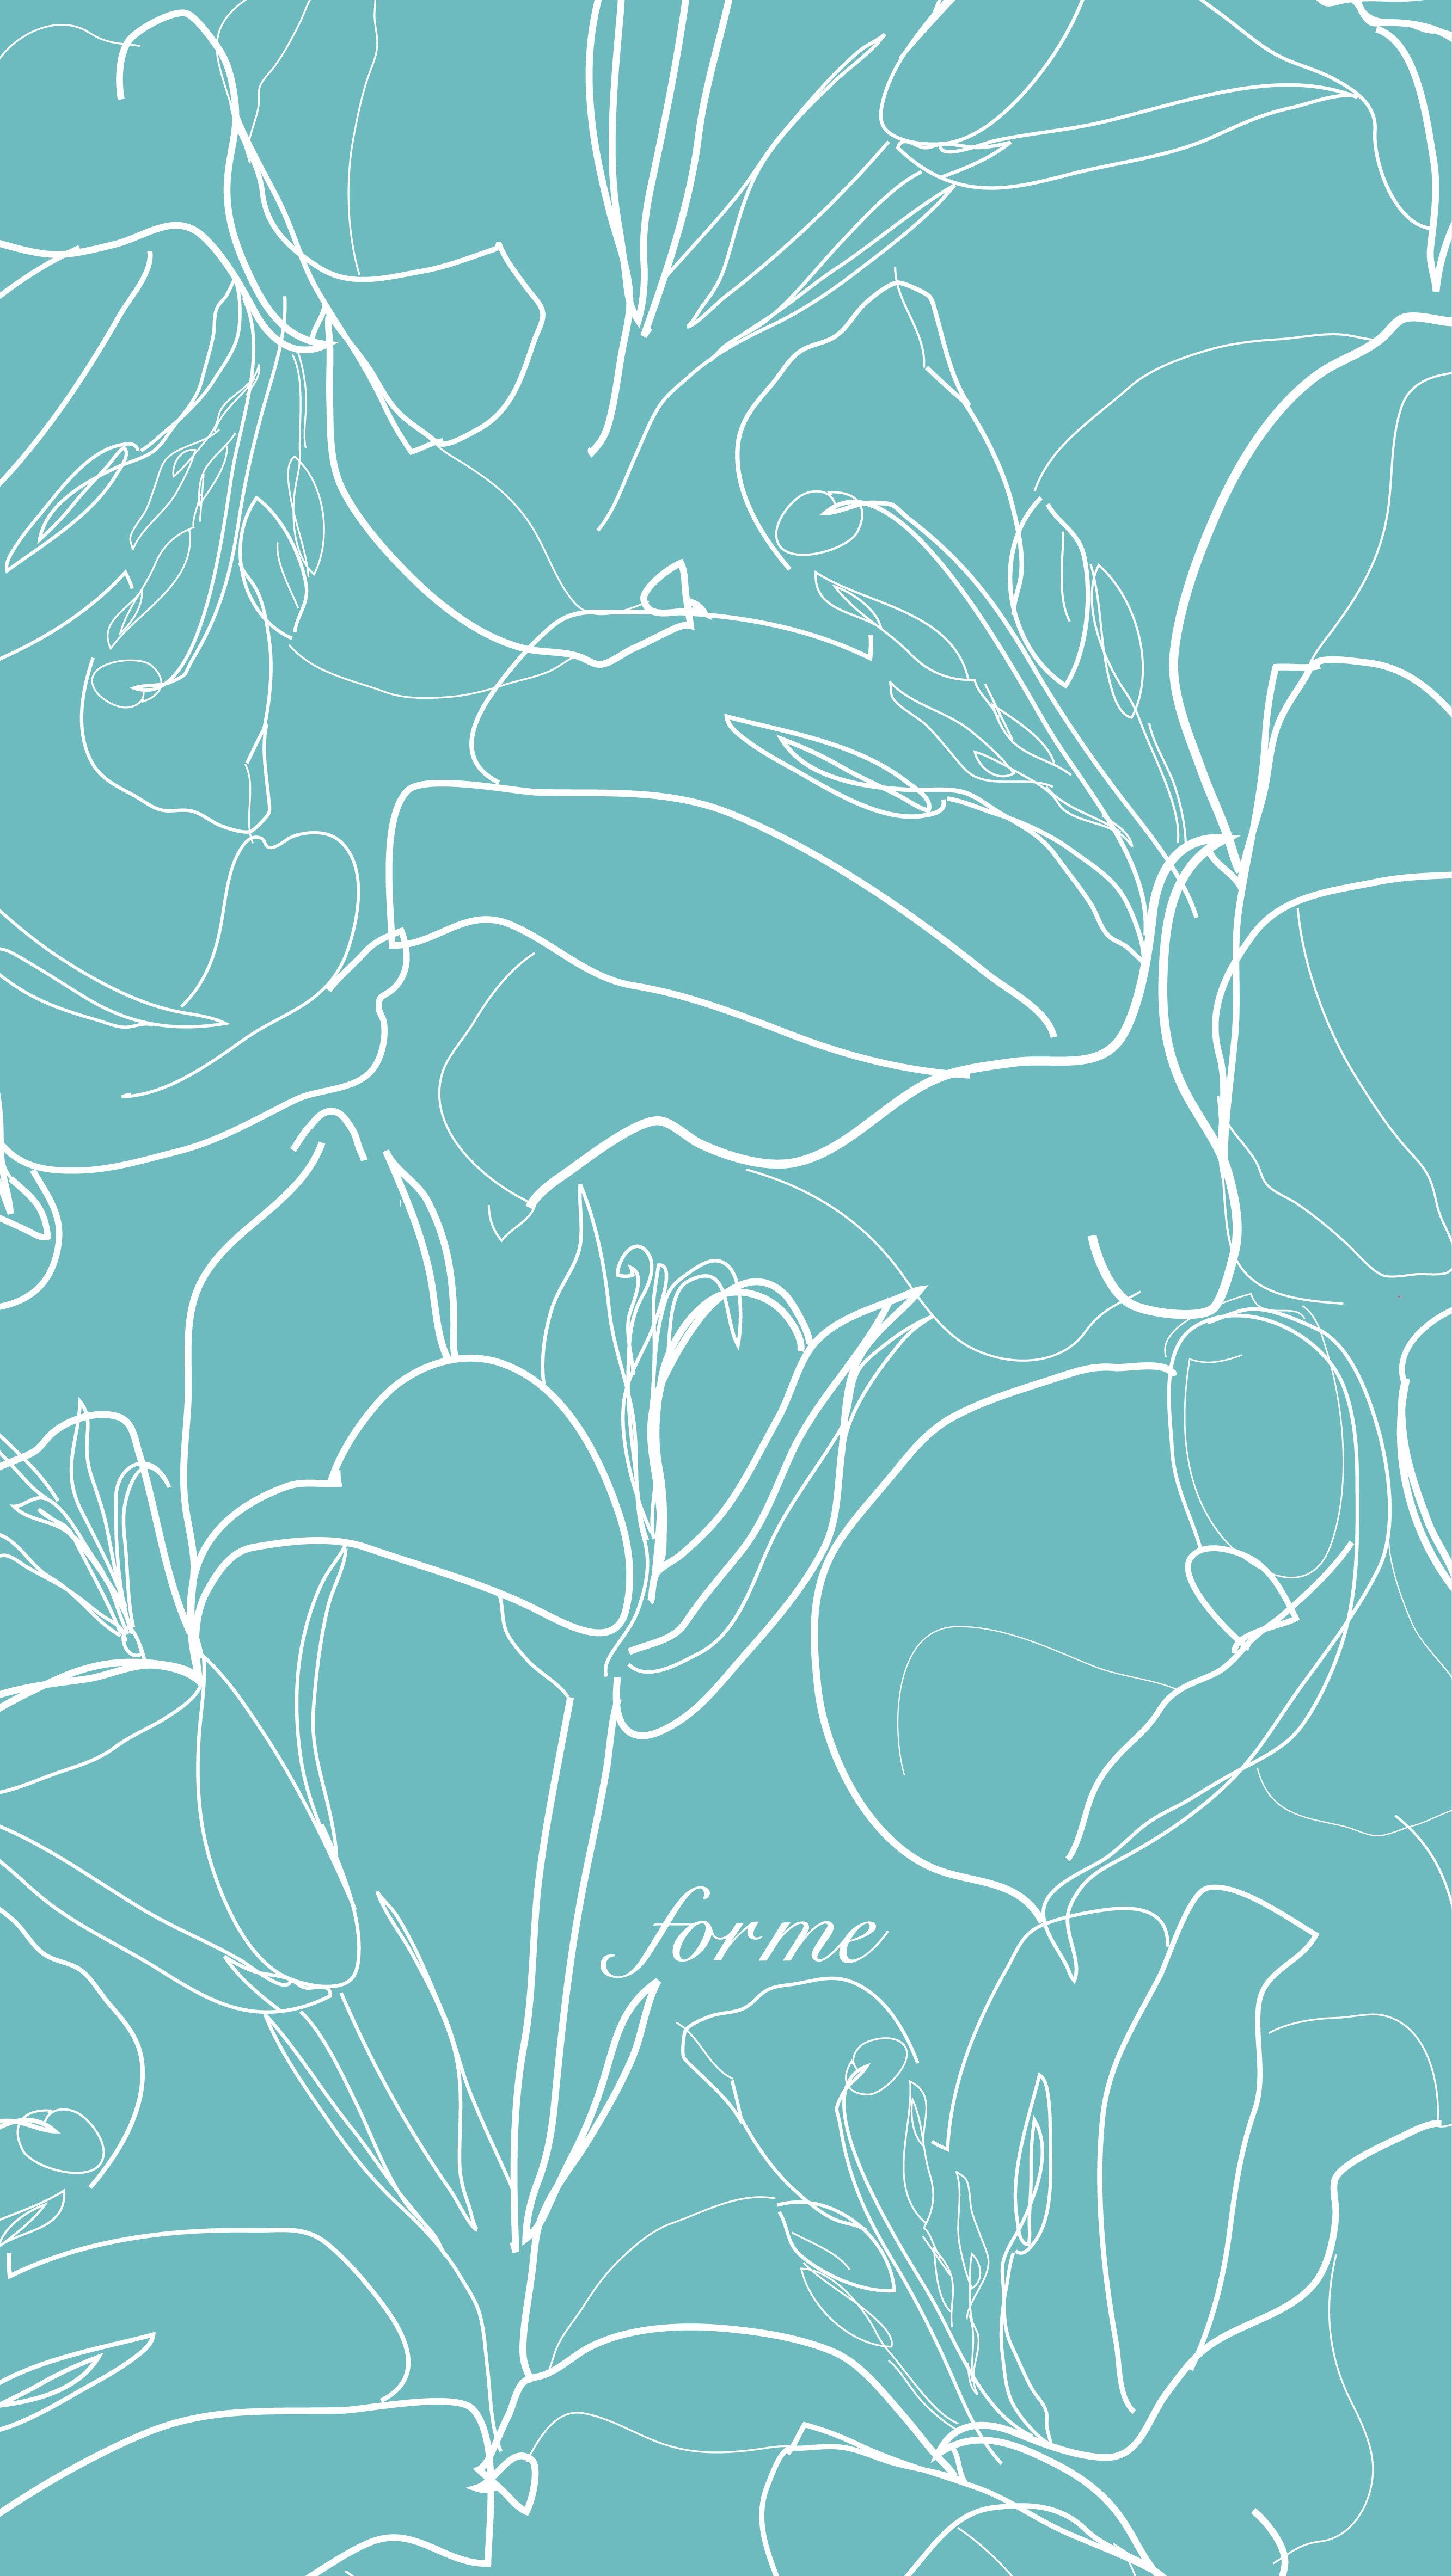 Floral, Prints, and More Pretty Wallpaper Your Phones Could Use